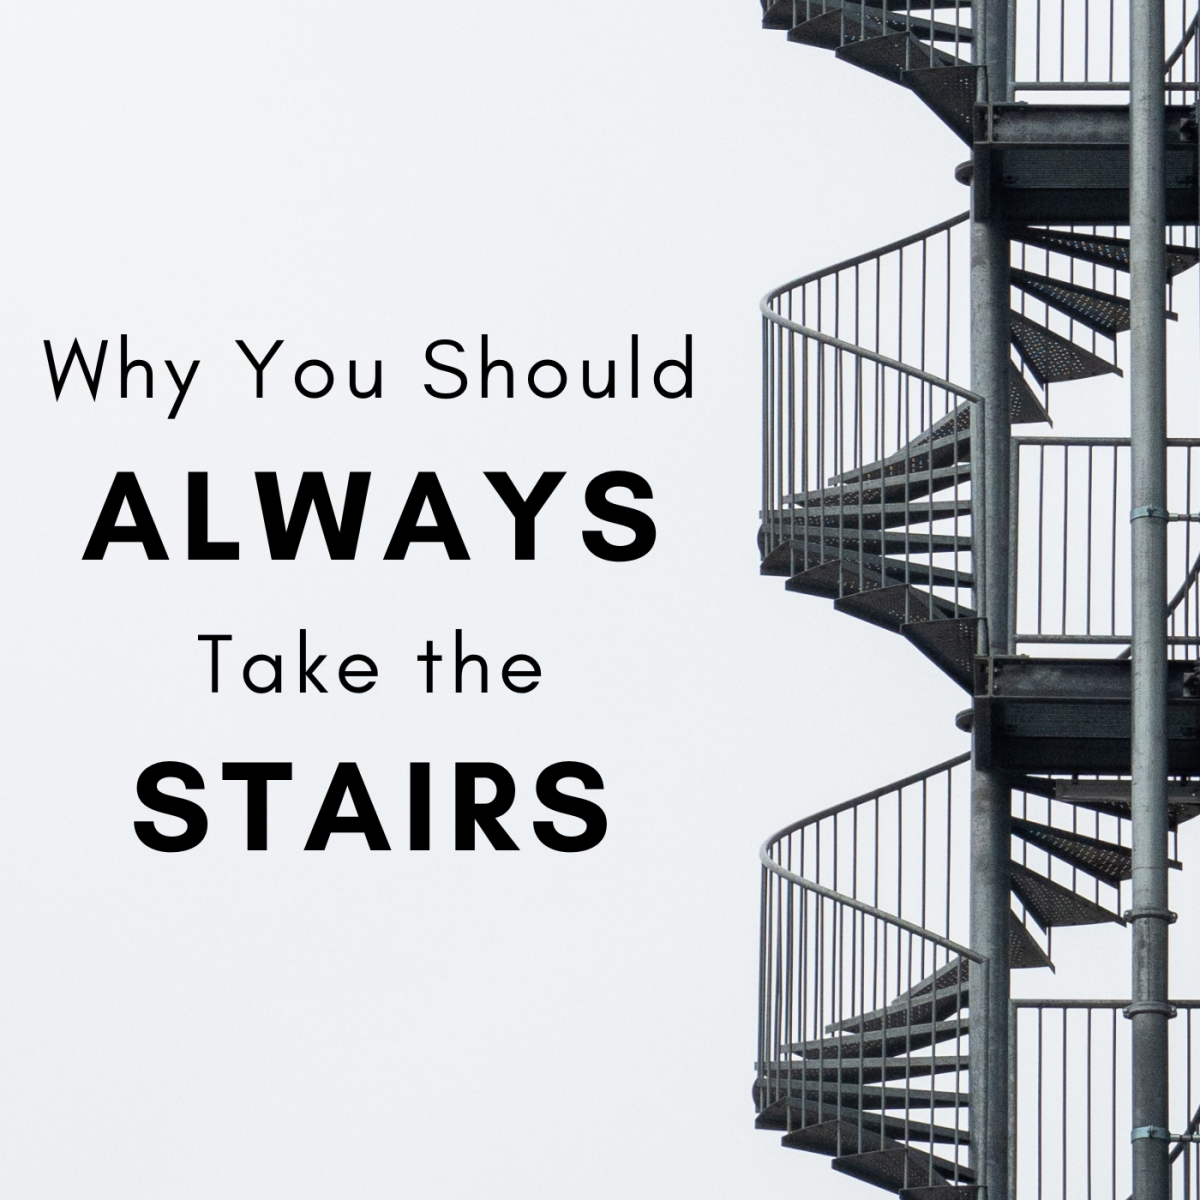 Why stairs are the better, healthier option.